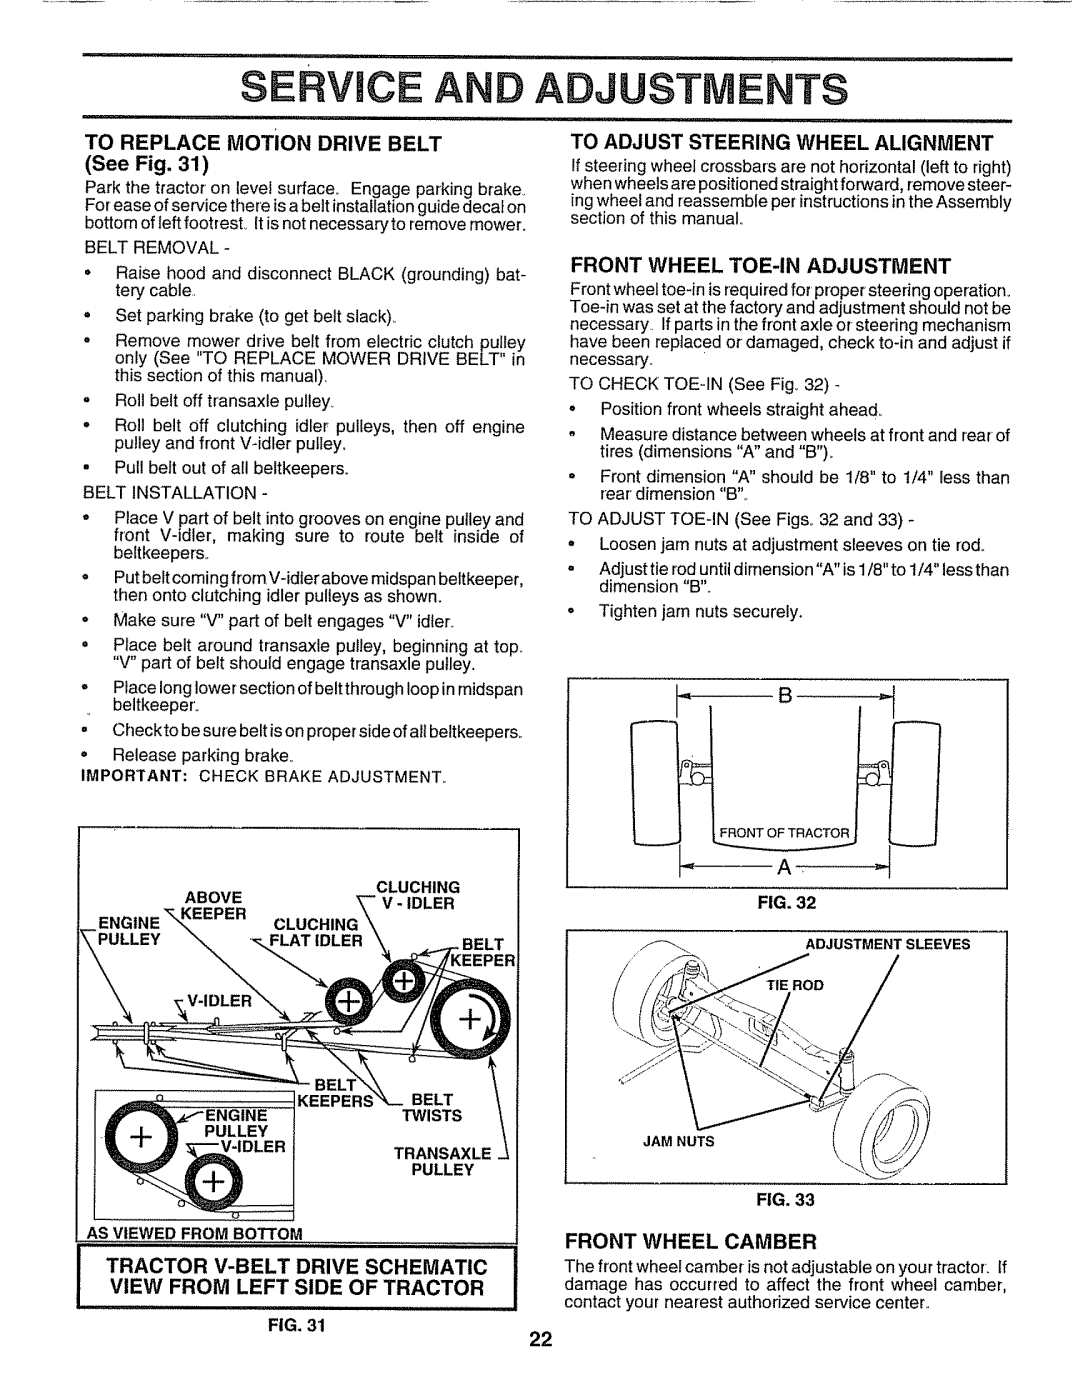 Sears 917.25597 Service An Adjustments, See Fig, Front Wheel Toe-Inadjustment, Tractor V-Belt Drive Schematic, Belt Twists 